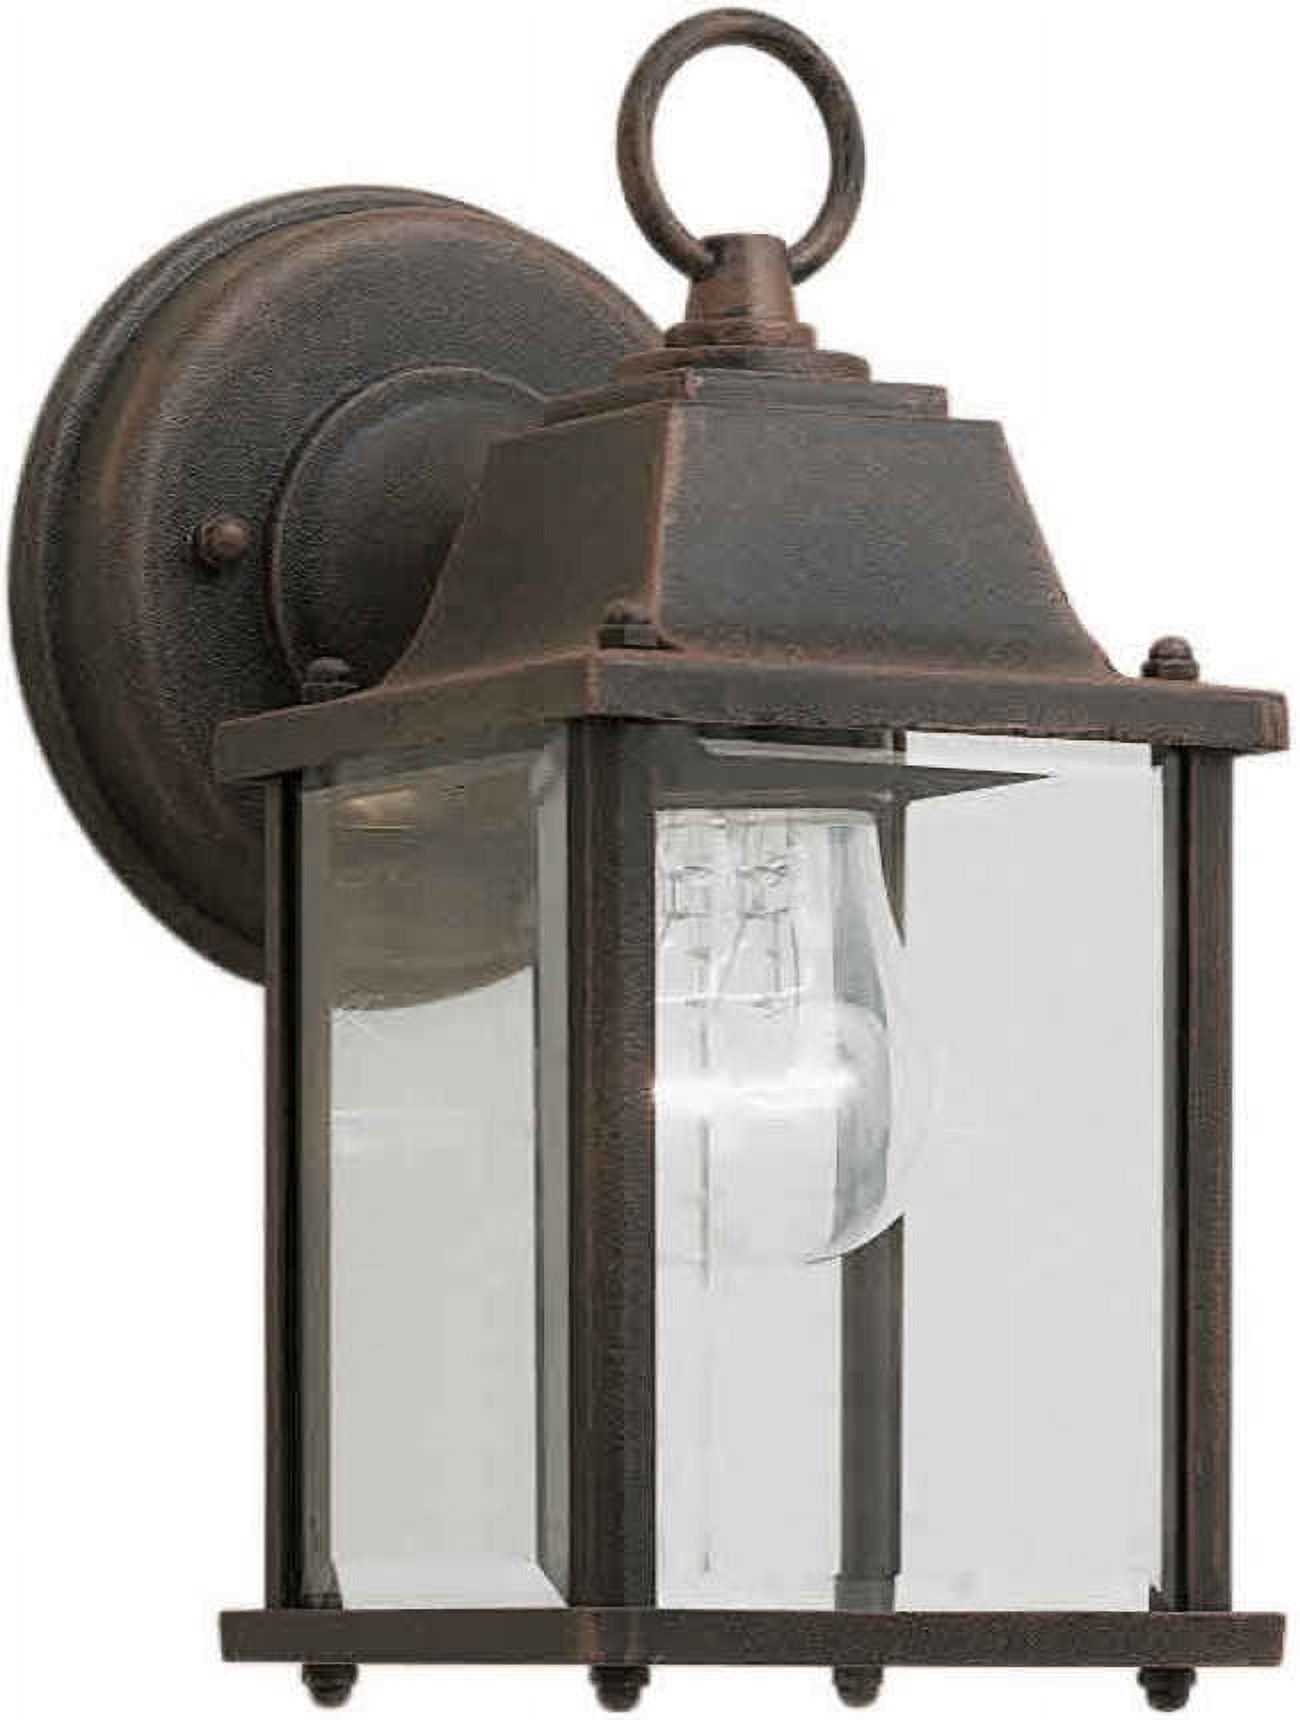 Forte Lighting 1705-01 Craftsman / Mission Outdoor Wall Sconce From The Exterior Lighting - image 1 of 1